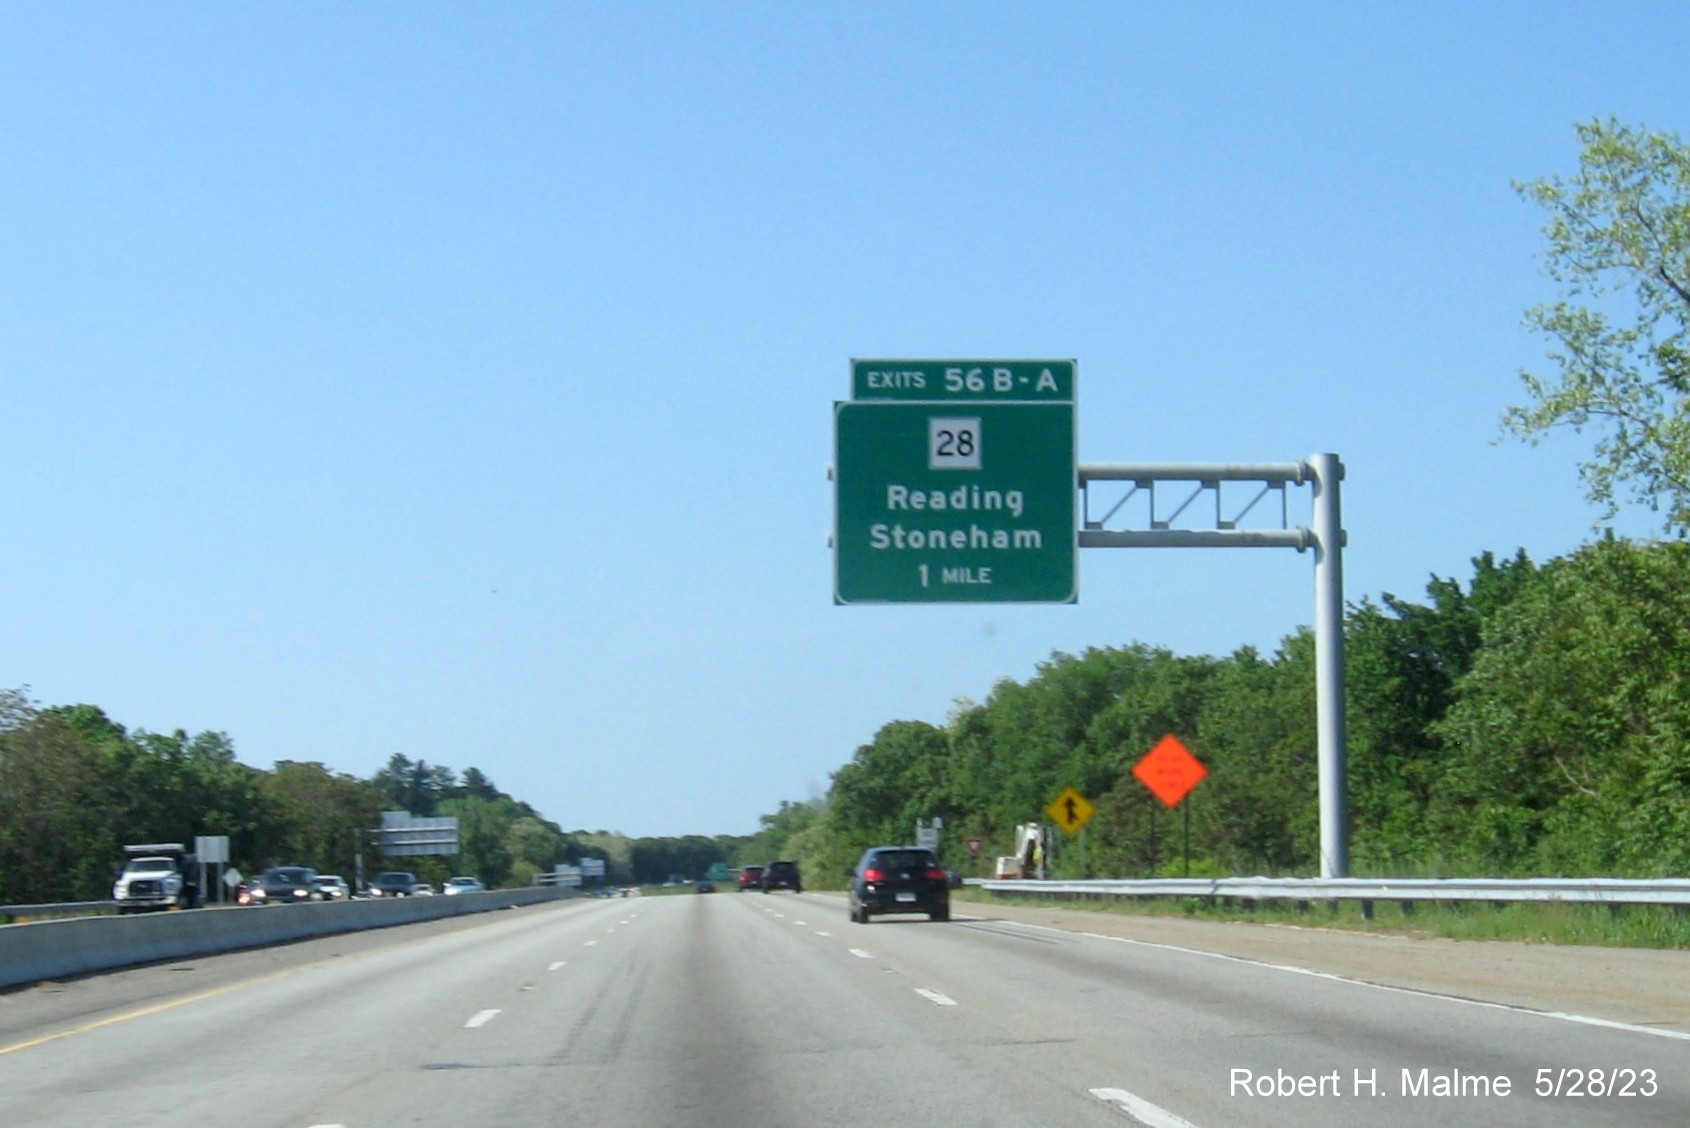 Image of recently placed 1 mile advance overhead sign for MA 28 exit on I-95 South in Reading, May 2023